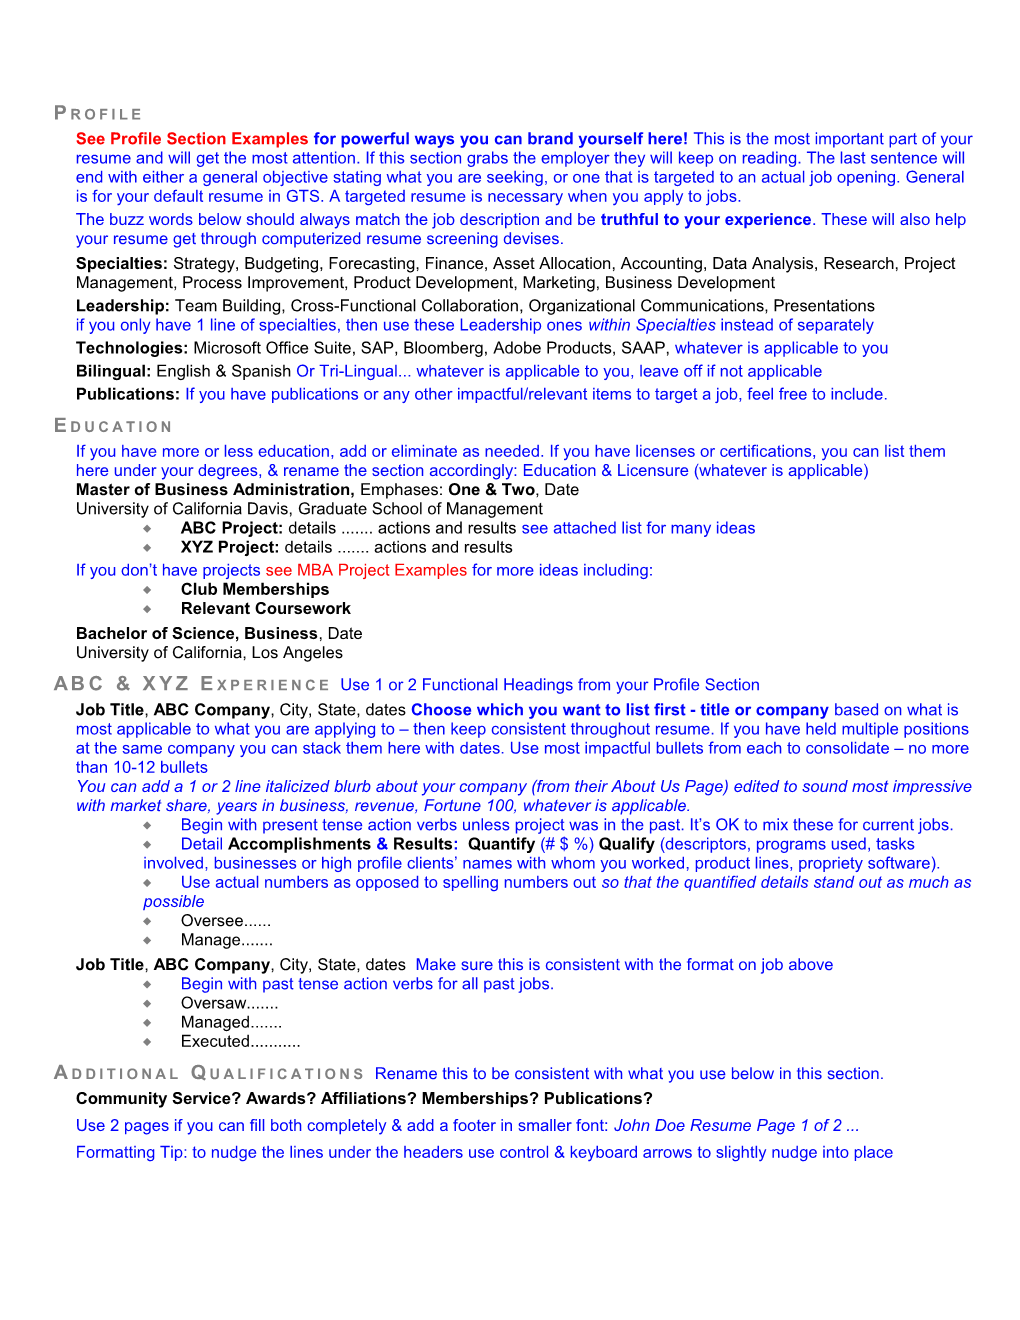 MBA Resume Template